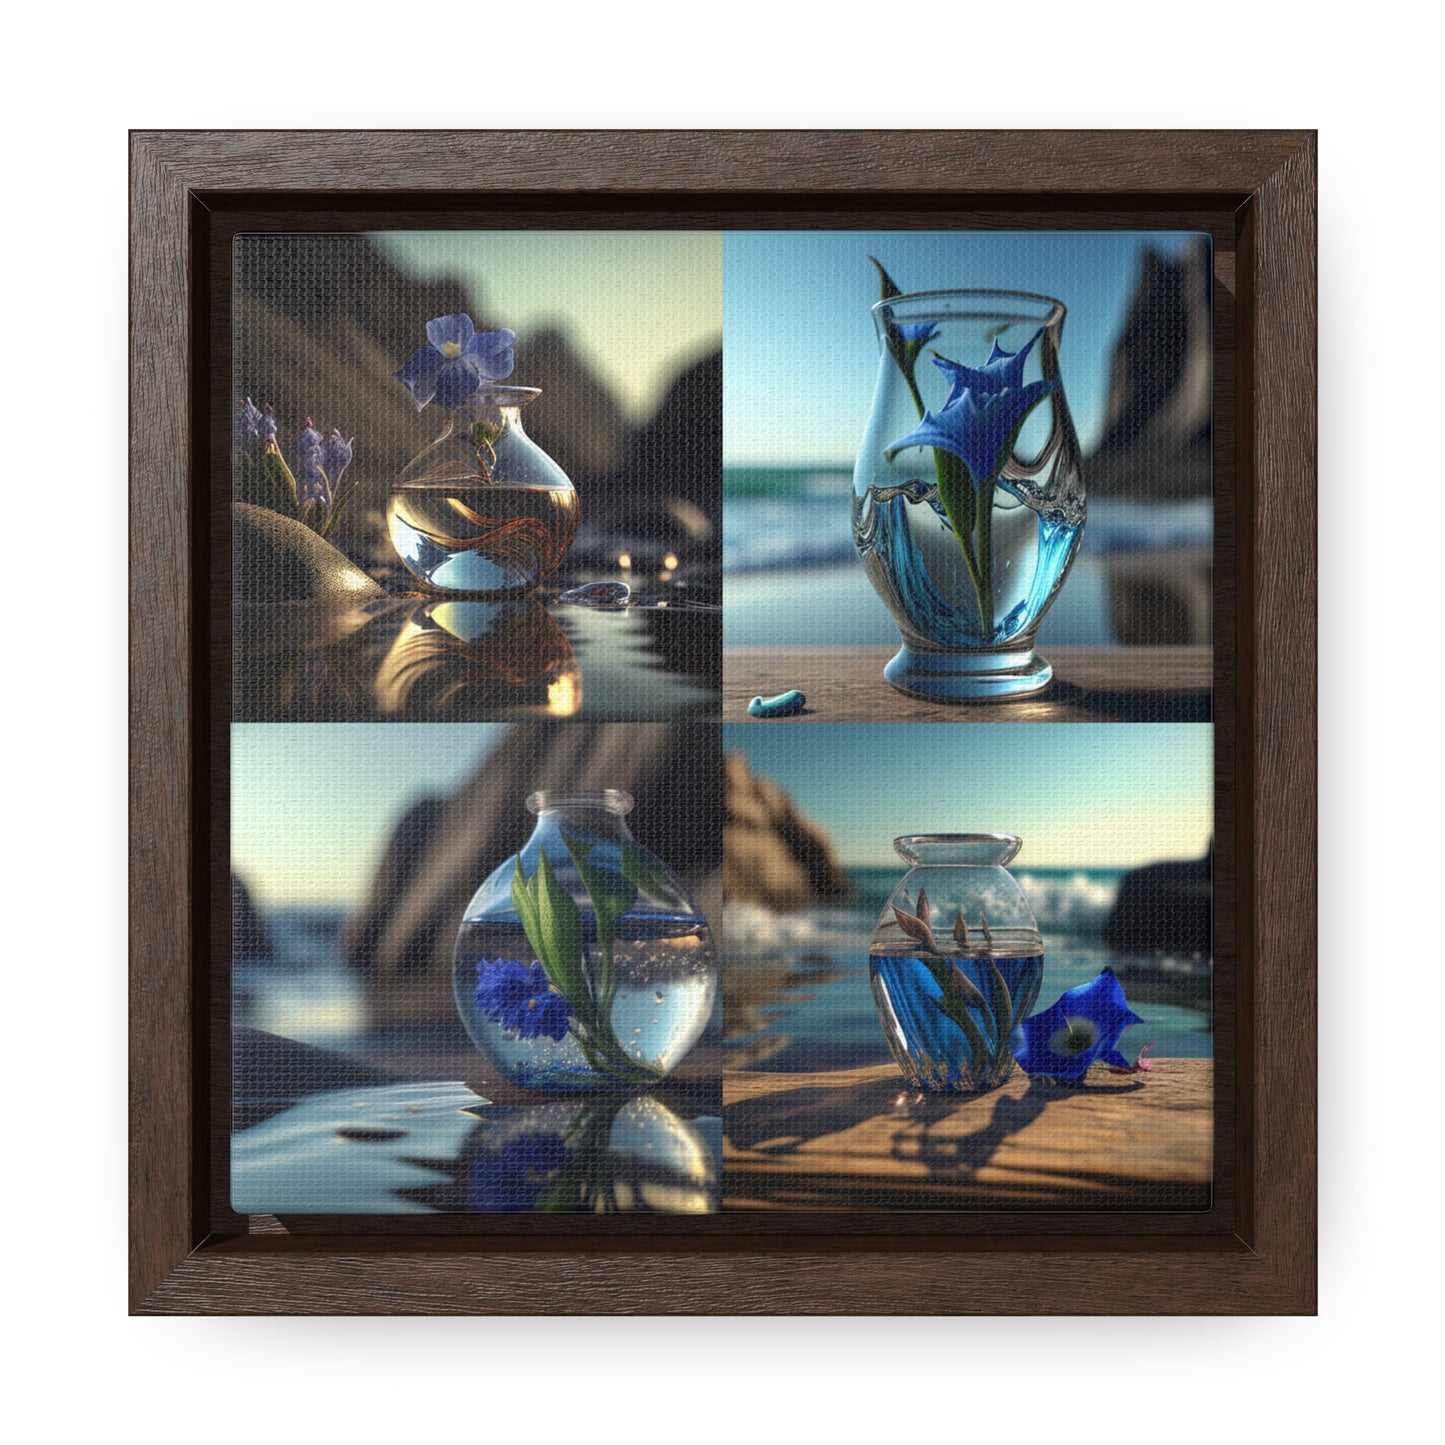 Gallery Canvas Wraps, Square Frame The Bluebell 5